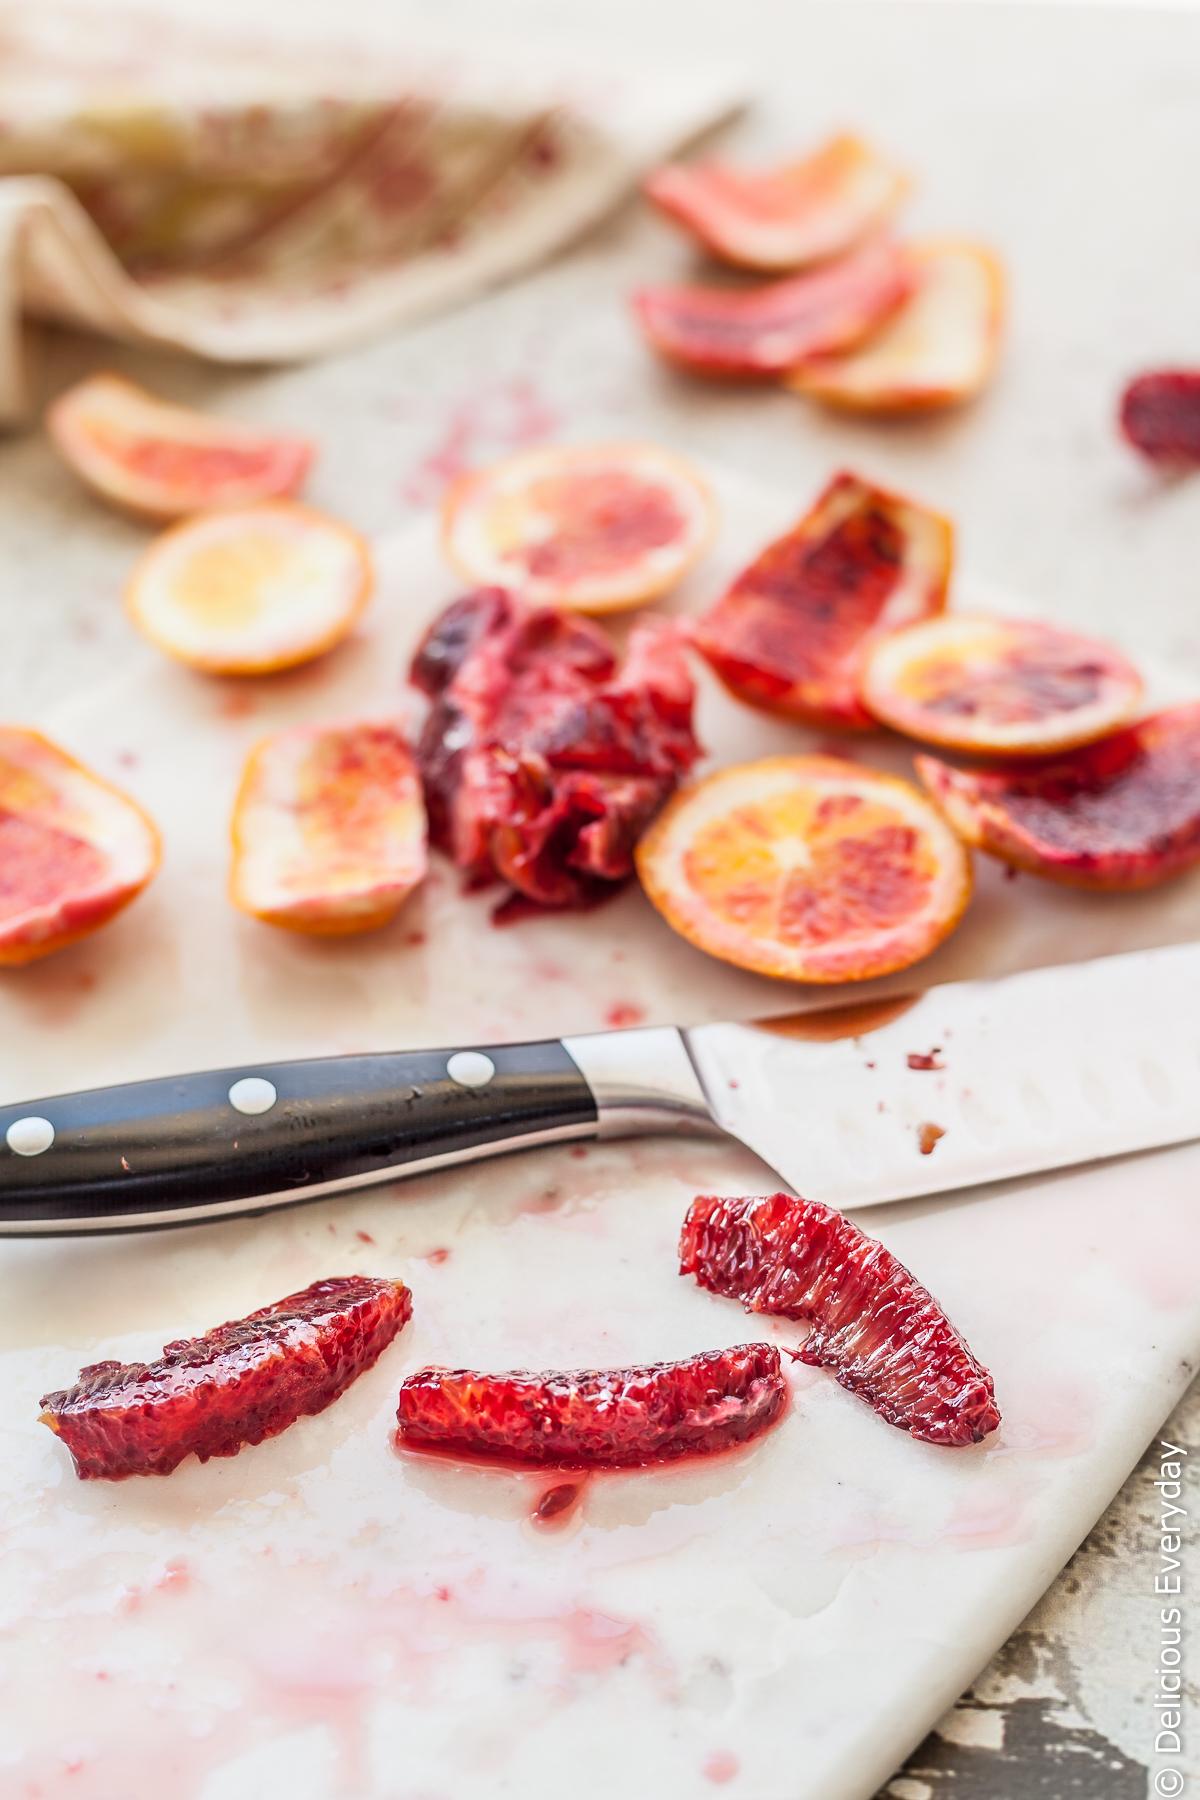 Beautiful Blood Orange Segments are the star of the show in this Roast Golden Beetroot Salad